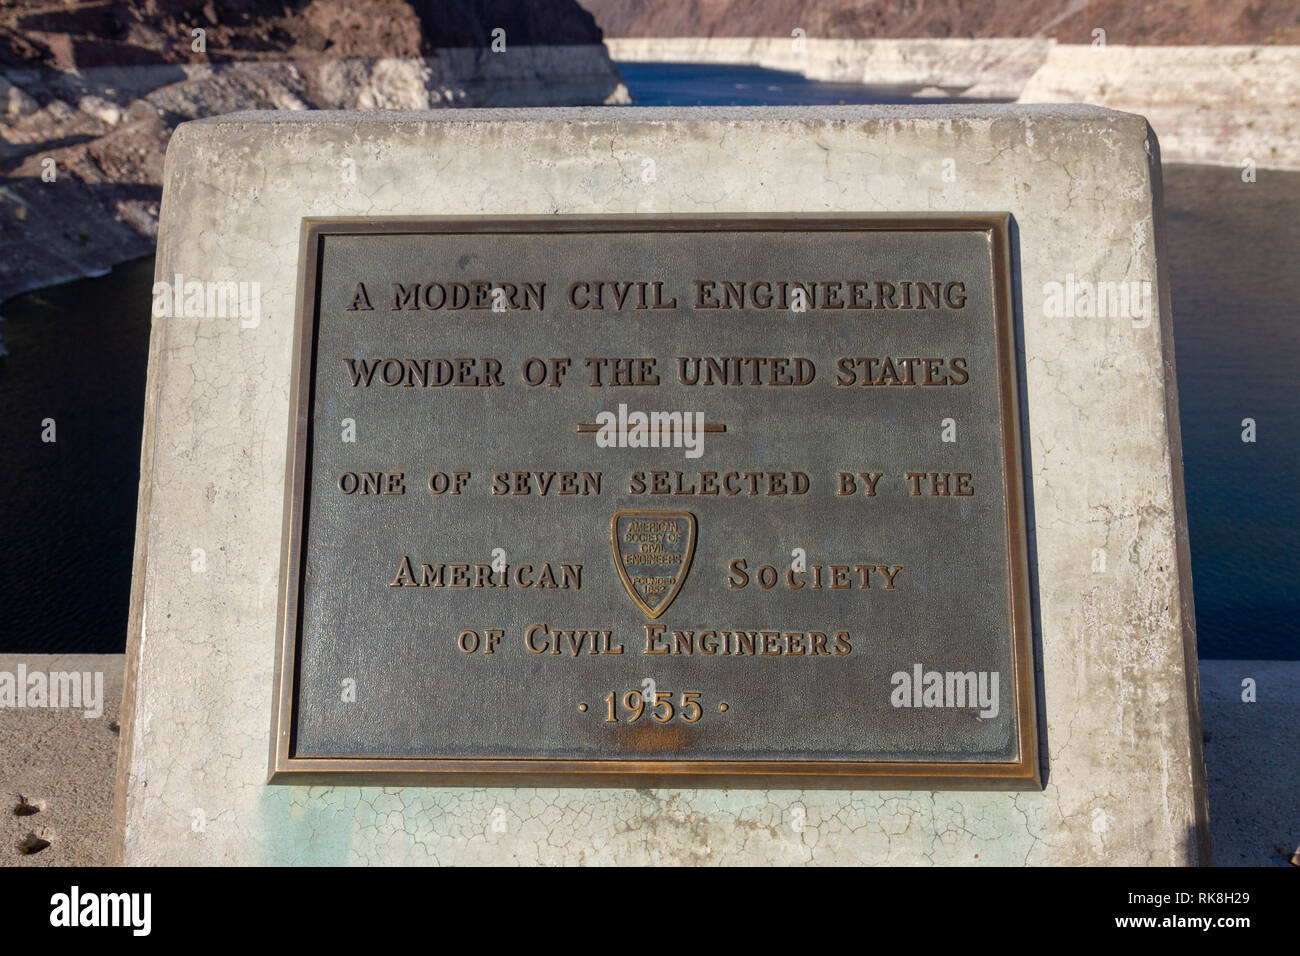 Memorial plaque to the Hoover Dam, one of the seven Engineering Wonders of the World, Hoover Dam, Nevada, United States. Stock Photo